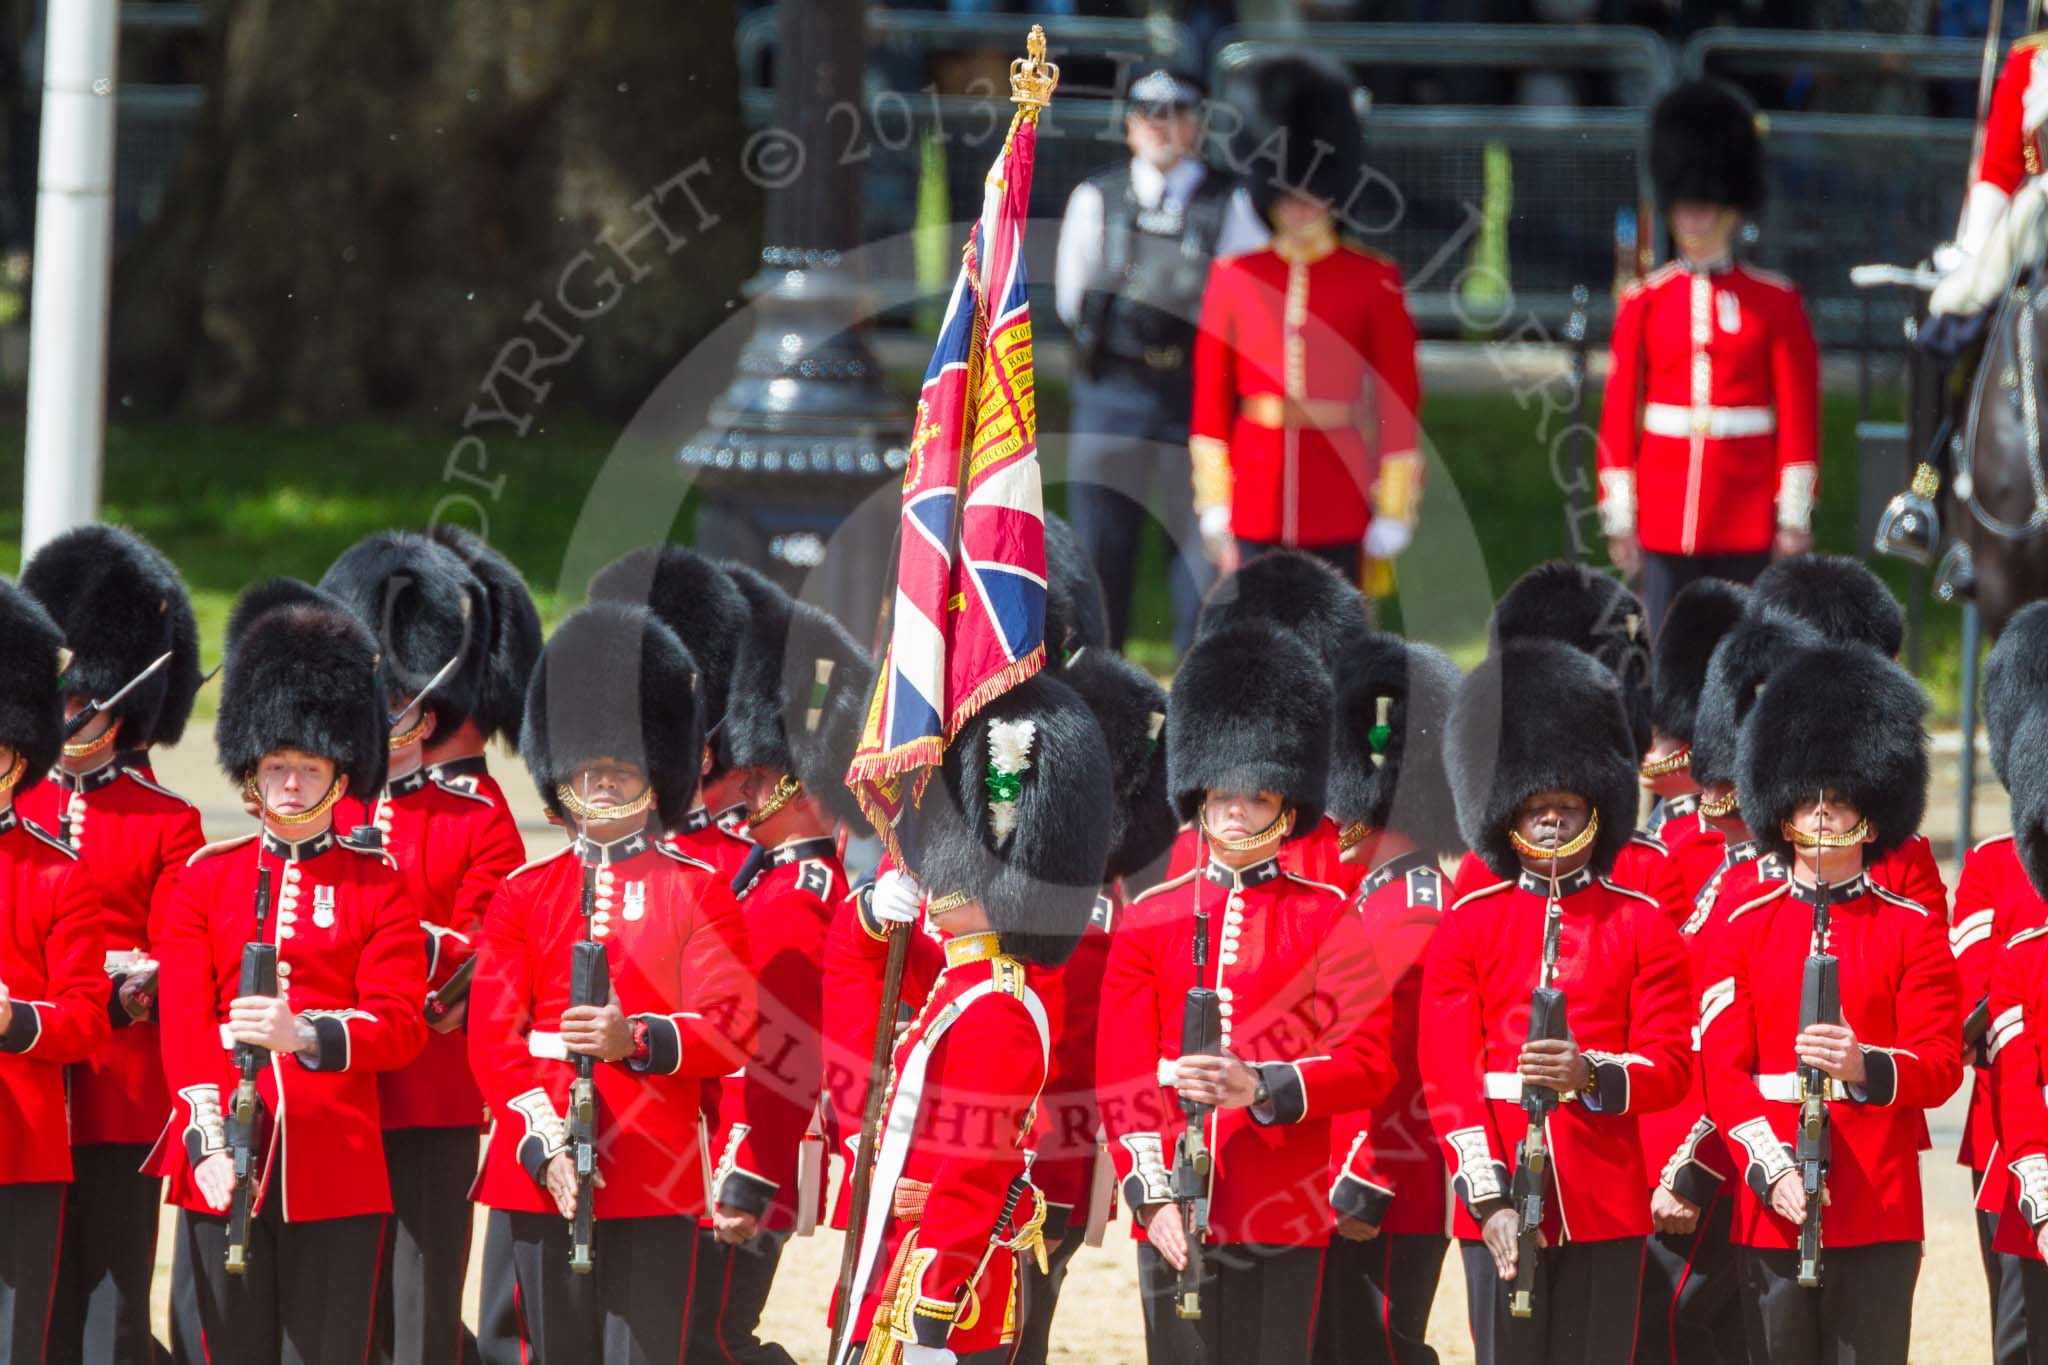 The Colonel's Review 2015.
Horse Guards Parade, Westminster,
London,

United Kingdom,
on 06 June 2015 at 11:26, image #337